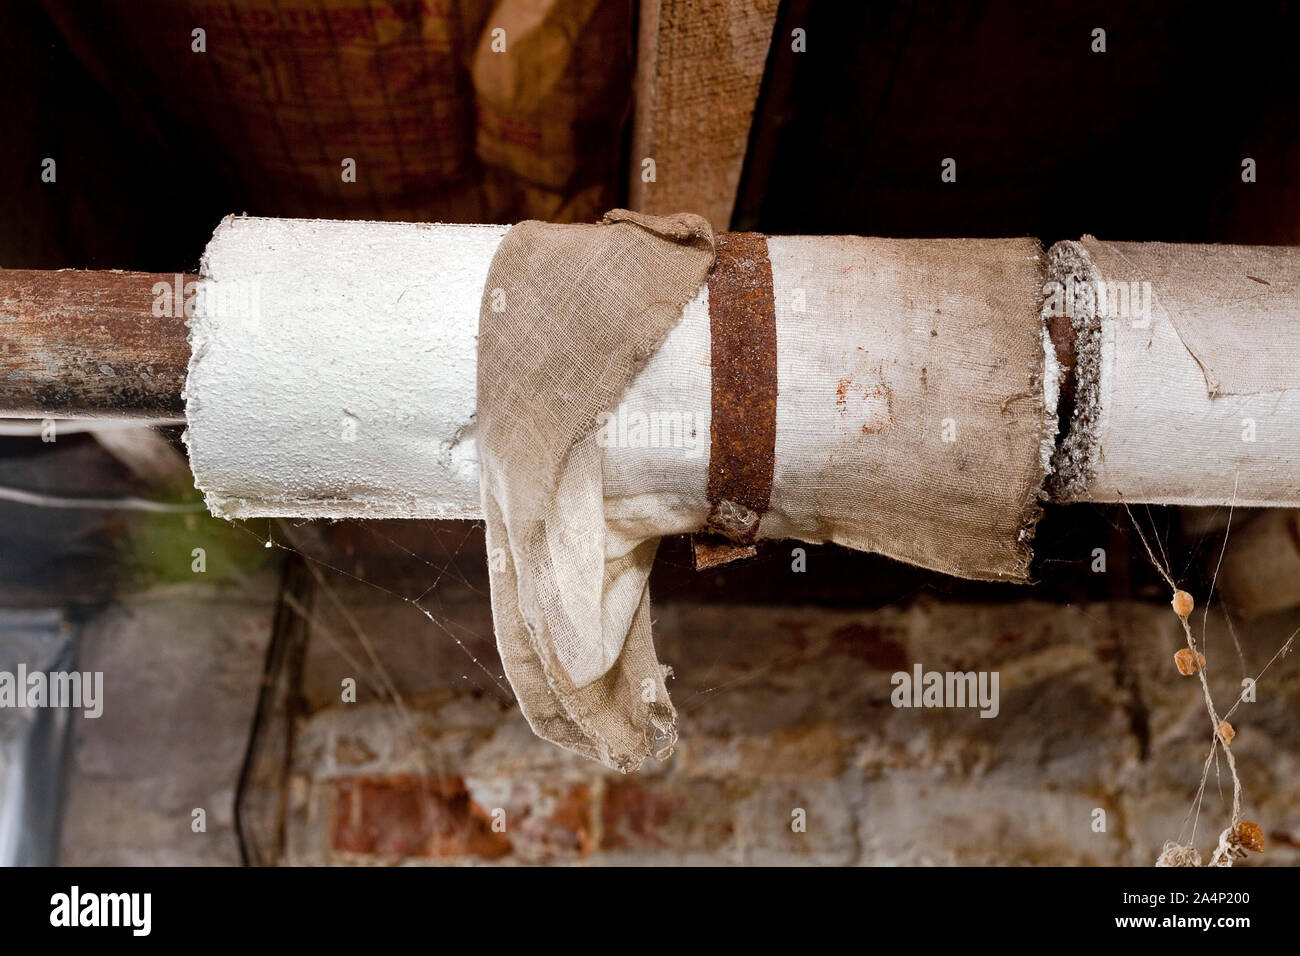 Basement plumbing pipes wrapped with asbestos insulation. Stock Photo